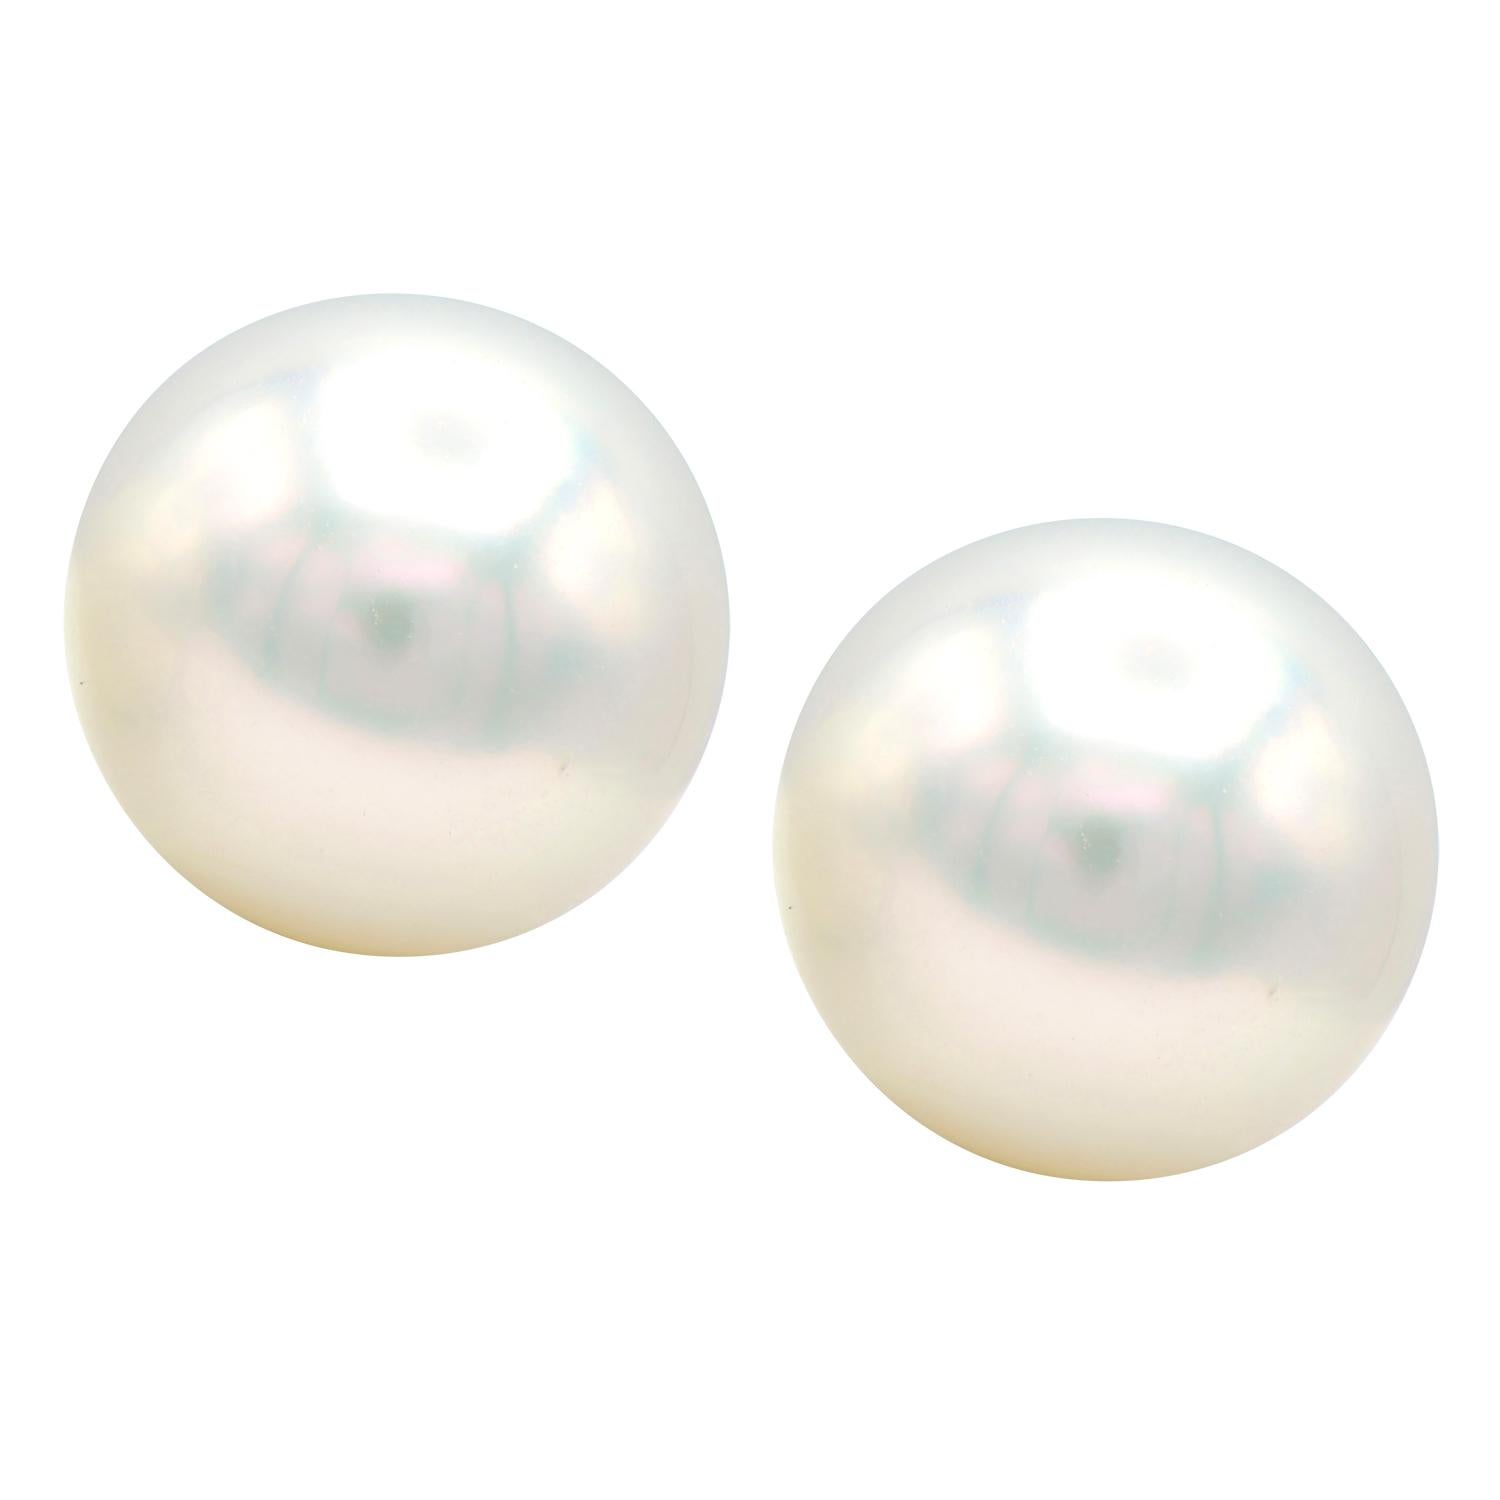 Round Cut 10-10.5mm South Sea Pearl Stud Earrings with 14 Karat White Gold Post and Backs For Sale